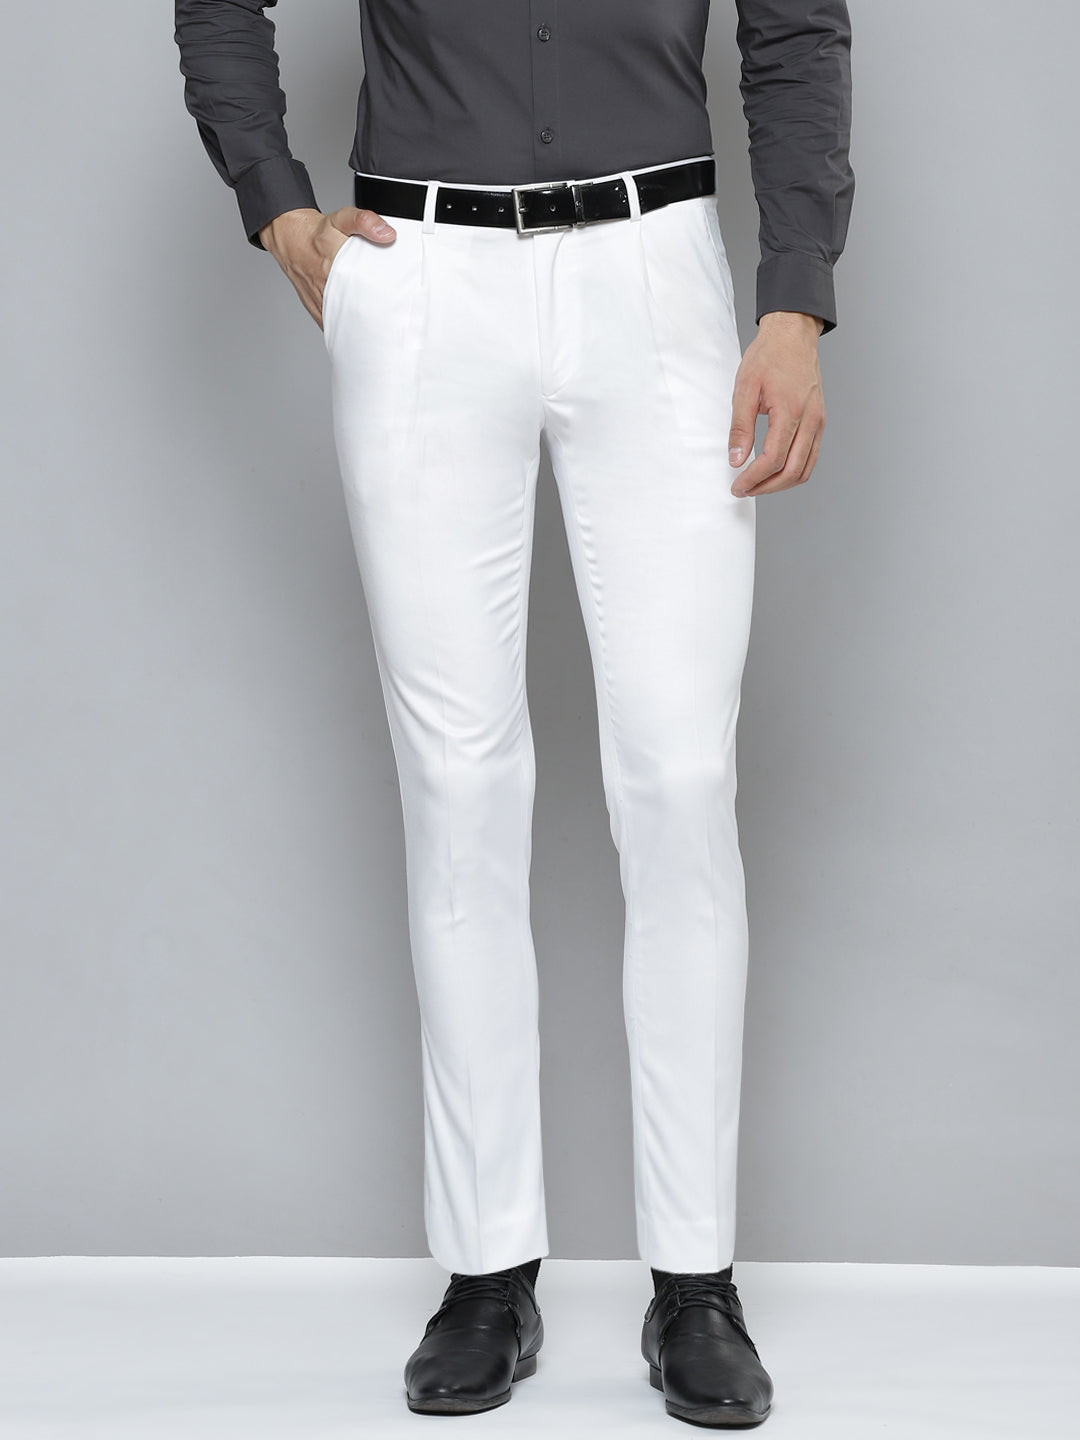 DENNISON Men White Smart Tapered Fit Pleated Formal Trousers